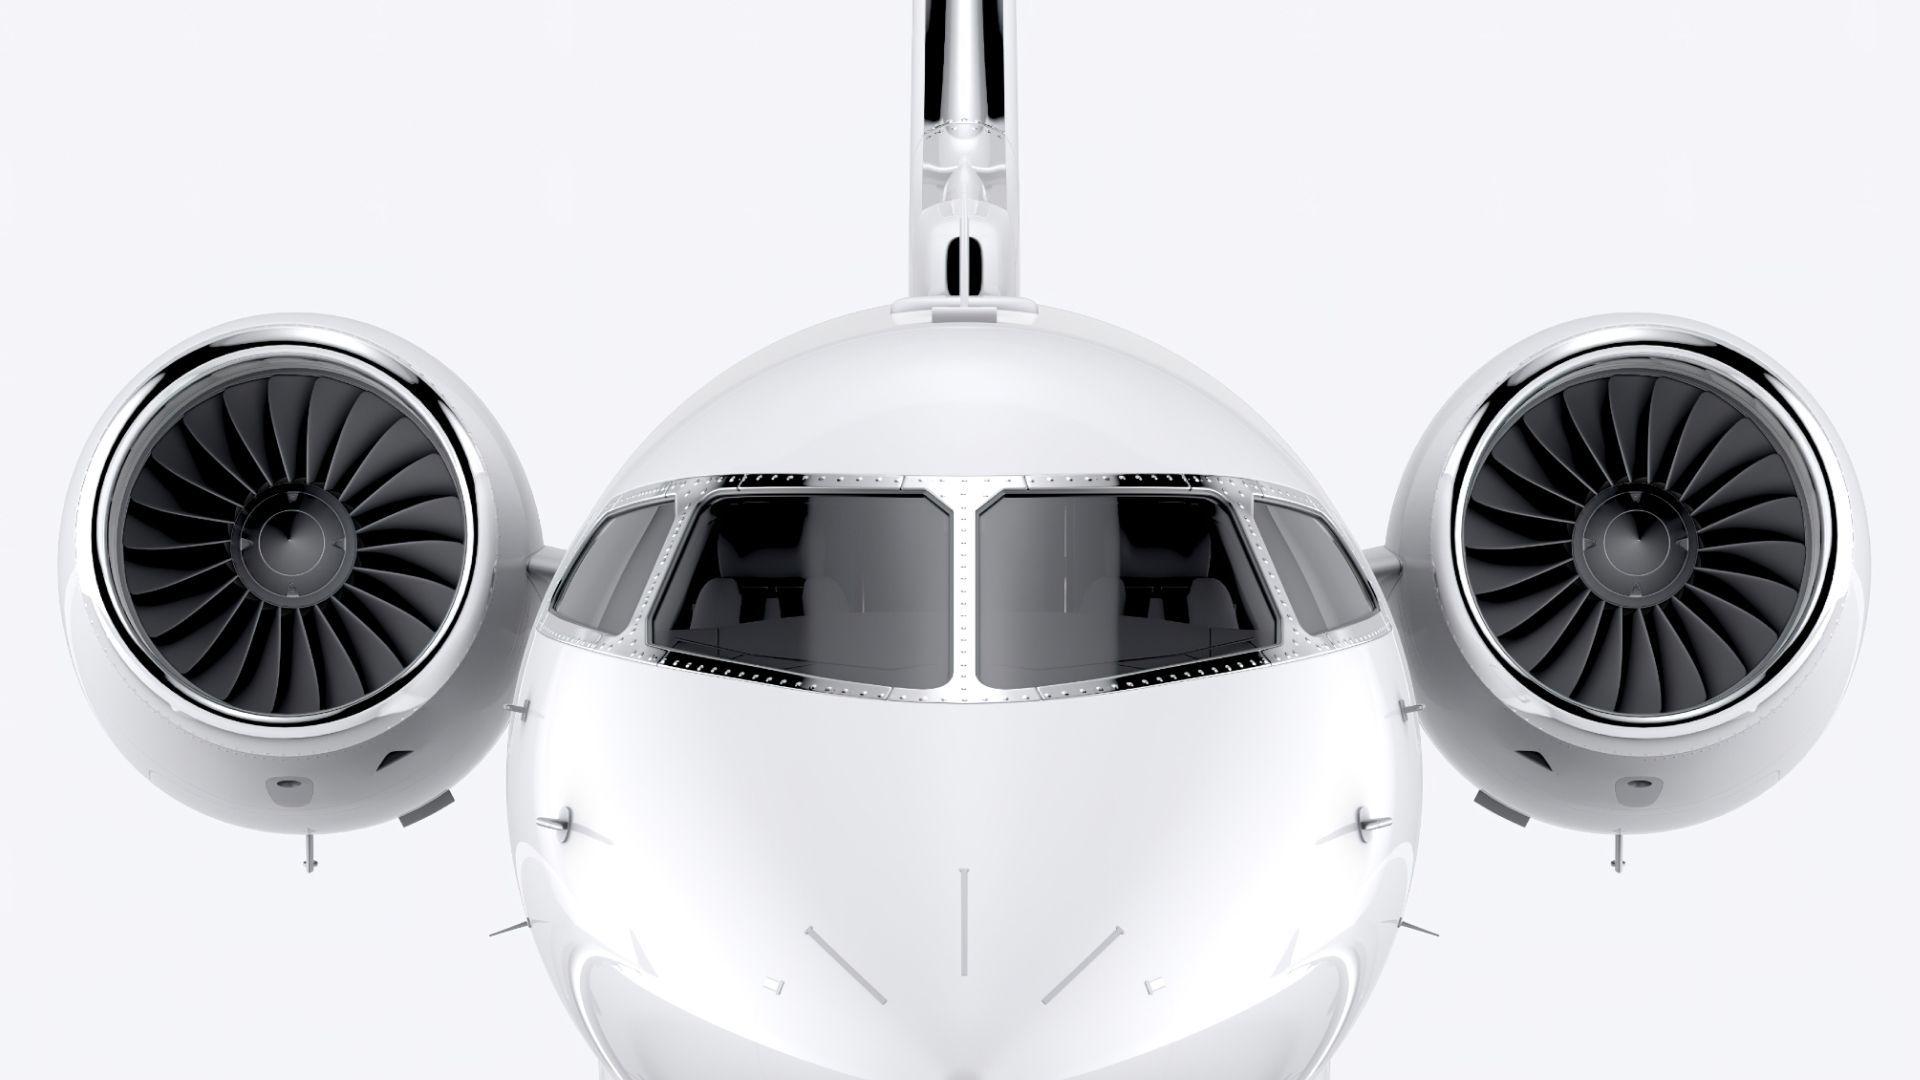 What Makes XO The World's Premier Private Aviation Network